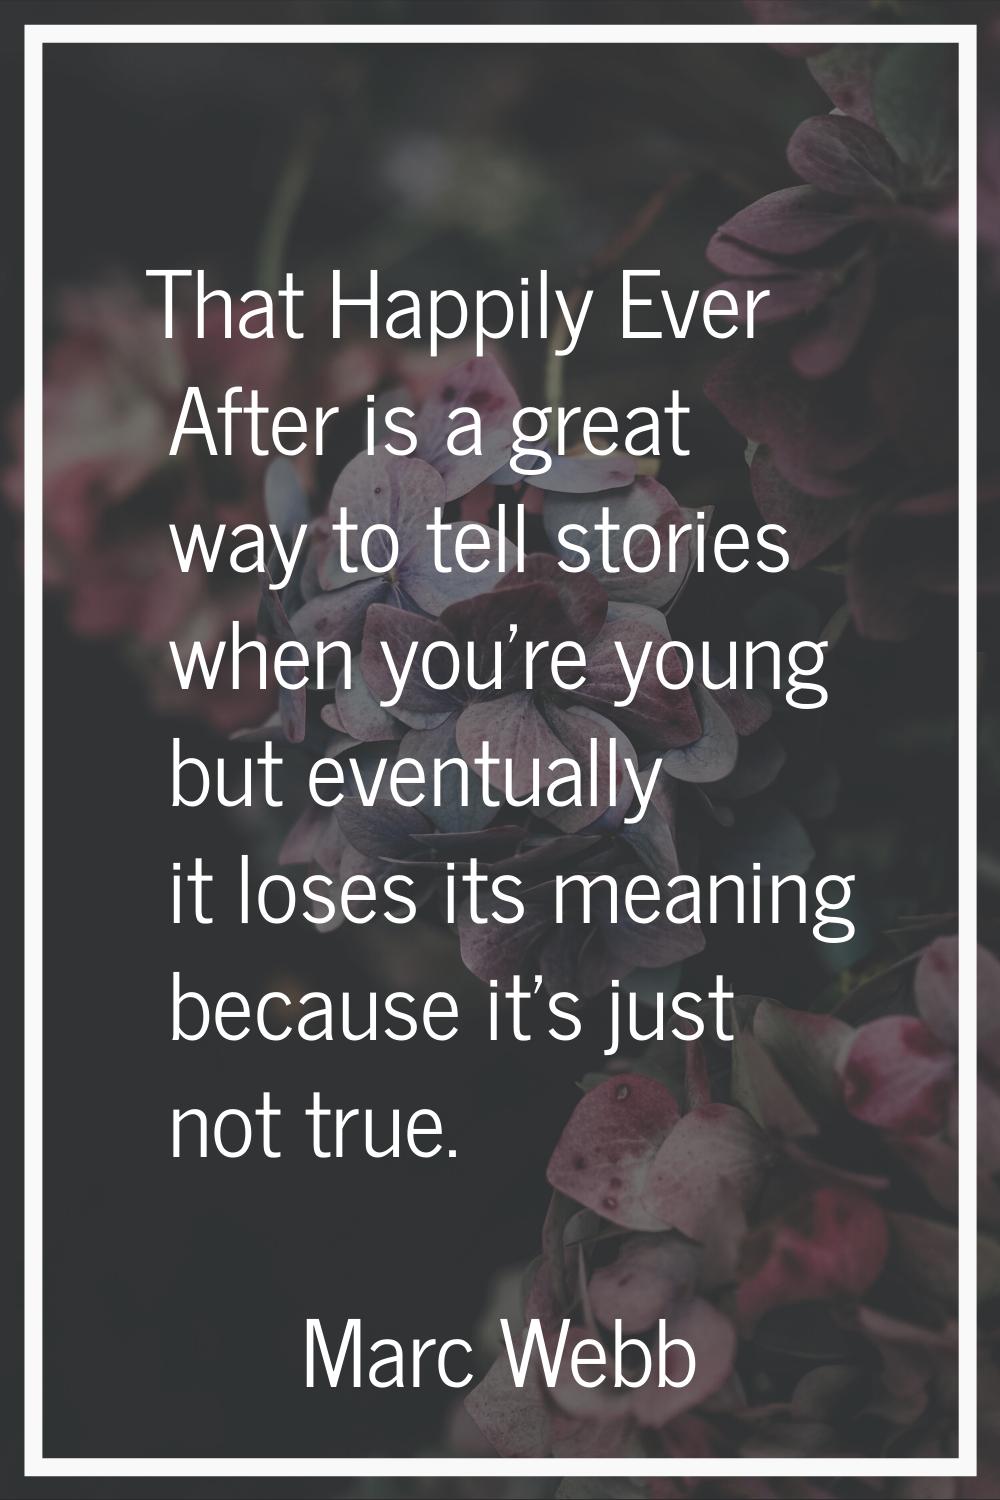 That Happily Ever After is a great way to tell stories when you're young but eventually it loses it